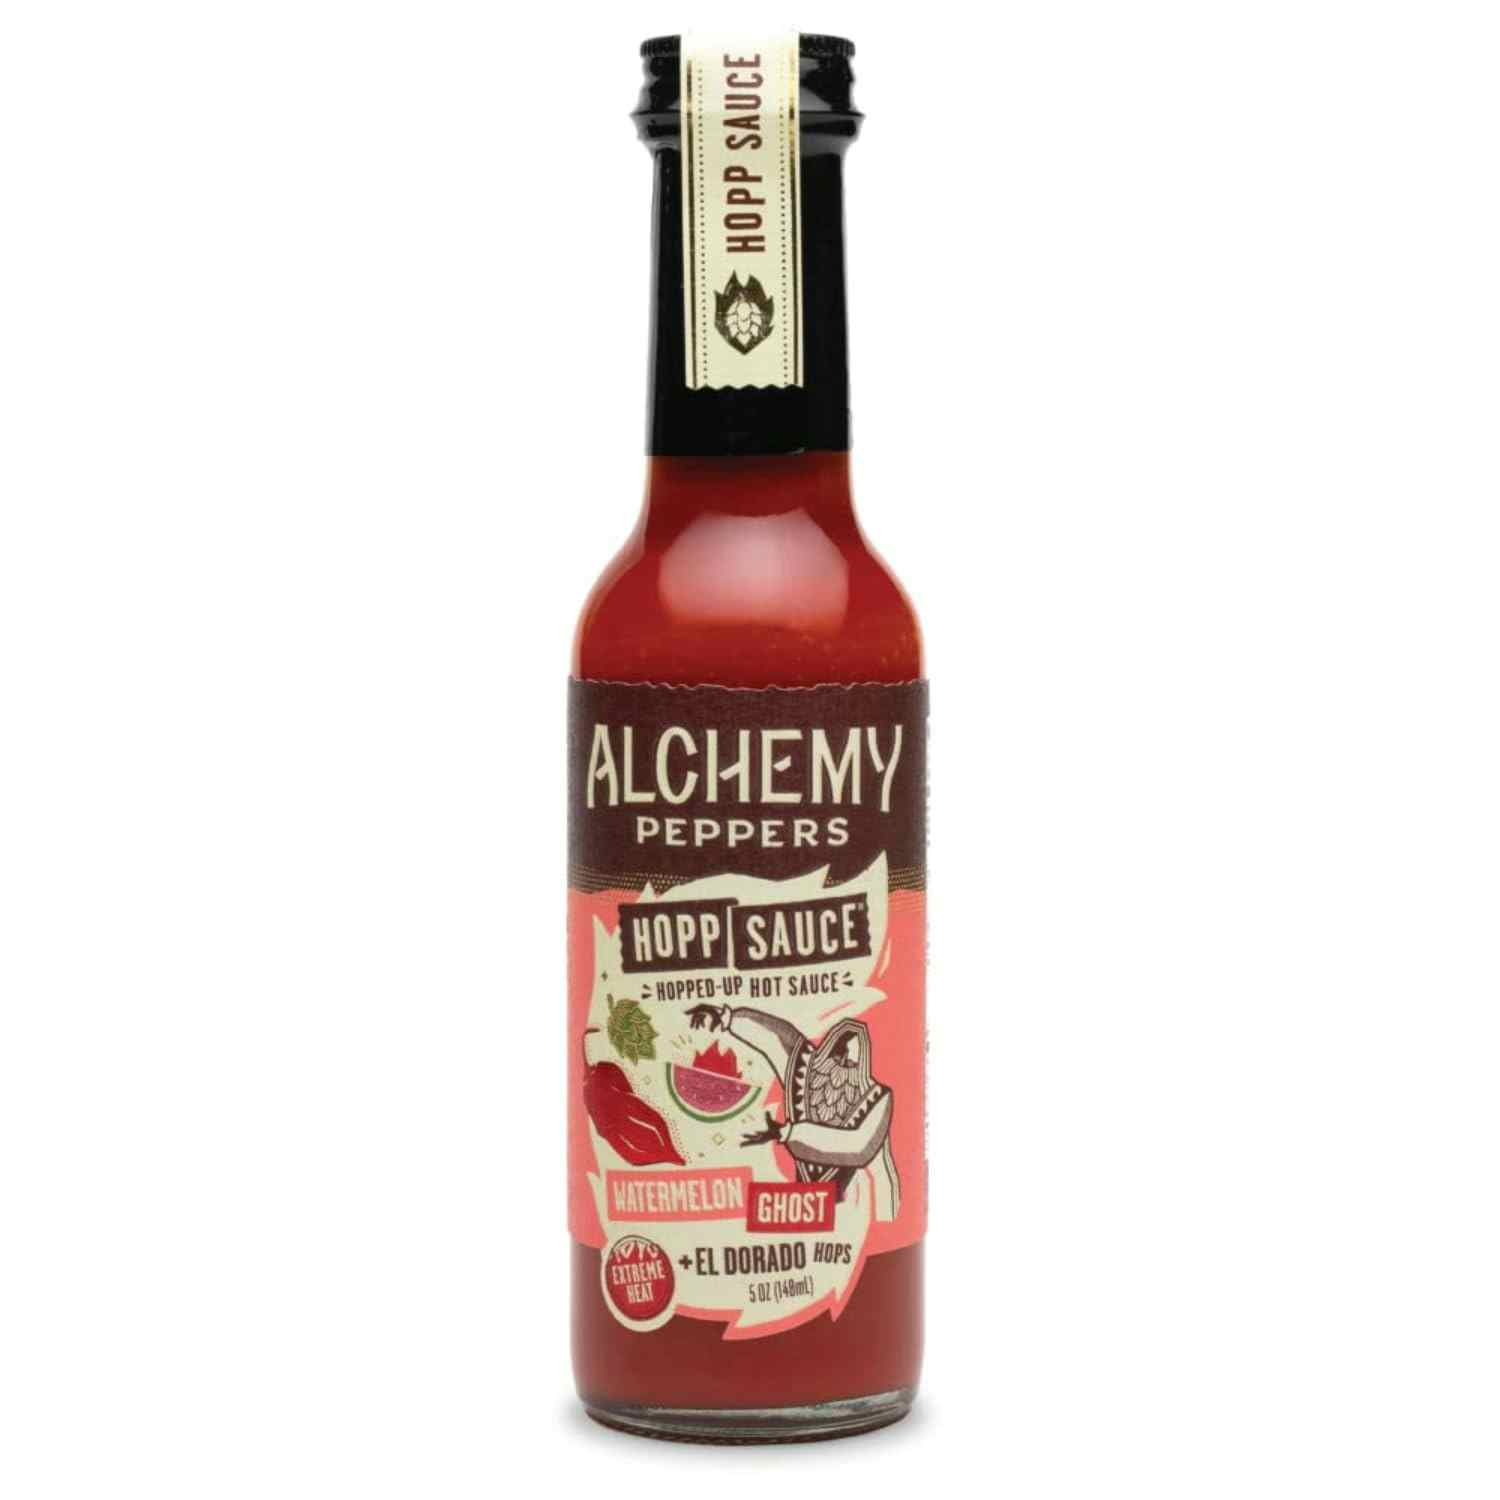 Watermelon Ghost Pepper + El Dorado Hops Hot Sauce by Alchemy Peppers - Scorching Hot Ghost Peppers, Tropical El Dorado Hops, and Sweet Watermelon Purée - Extreme Heat - 5 oz (12 Pack)